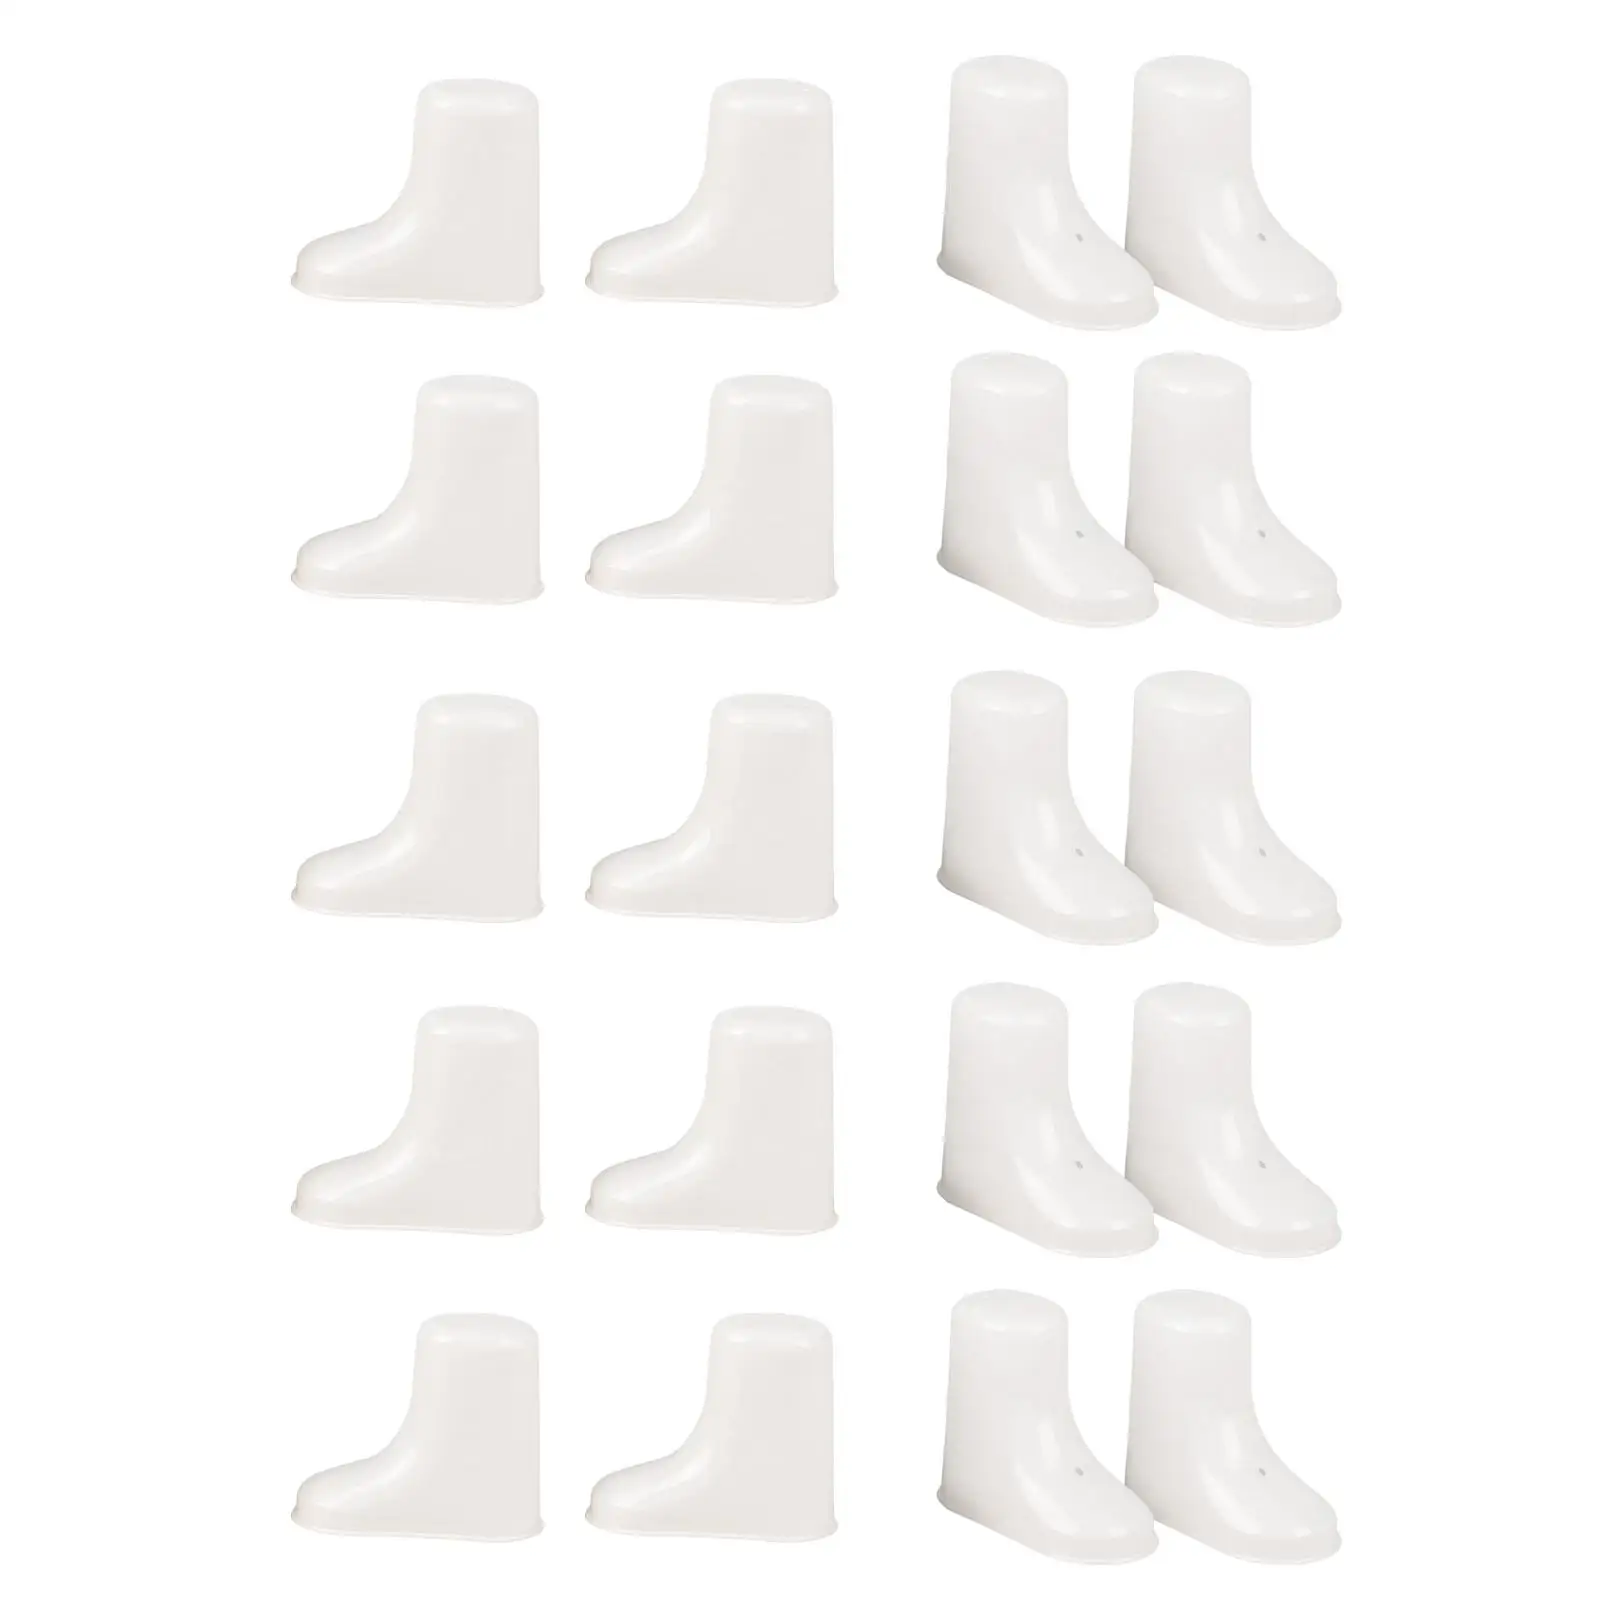 10 Pair Shoes Socks Display Stand Toddler Shoes Supports Toddler Booties Stand Foot Model Baby Feet Display for Display Supplies